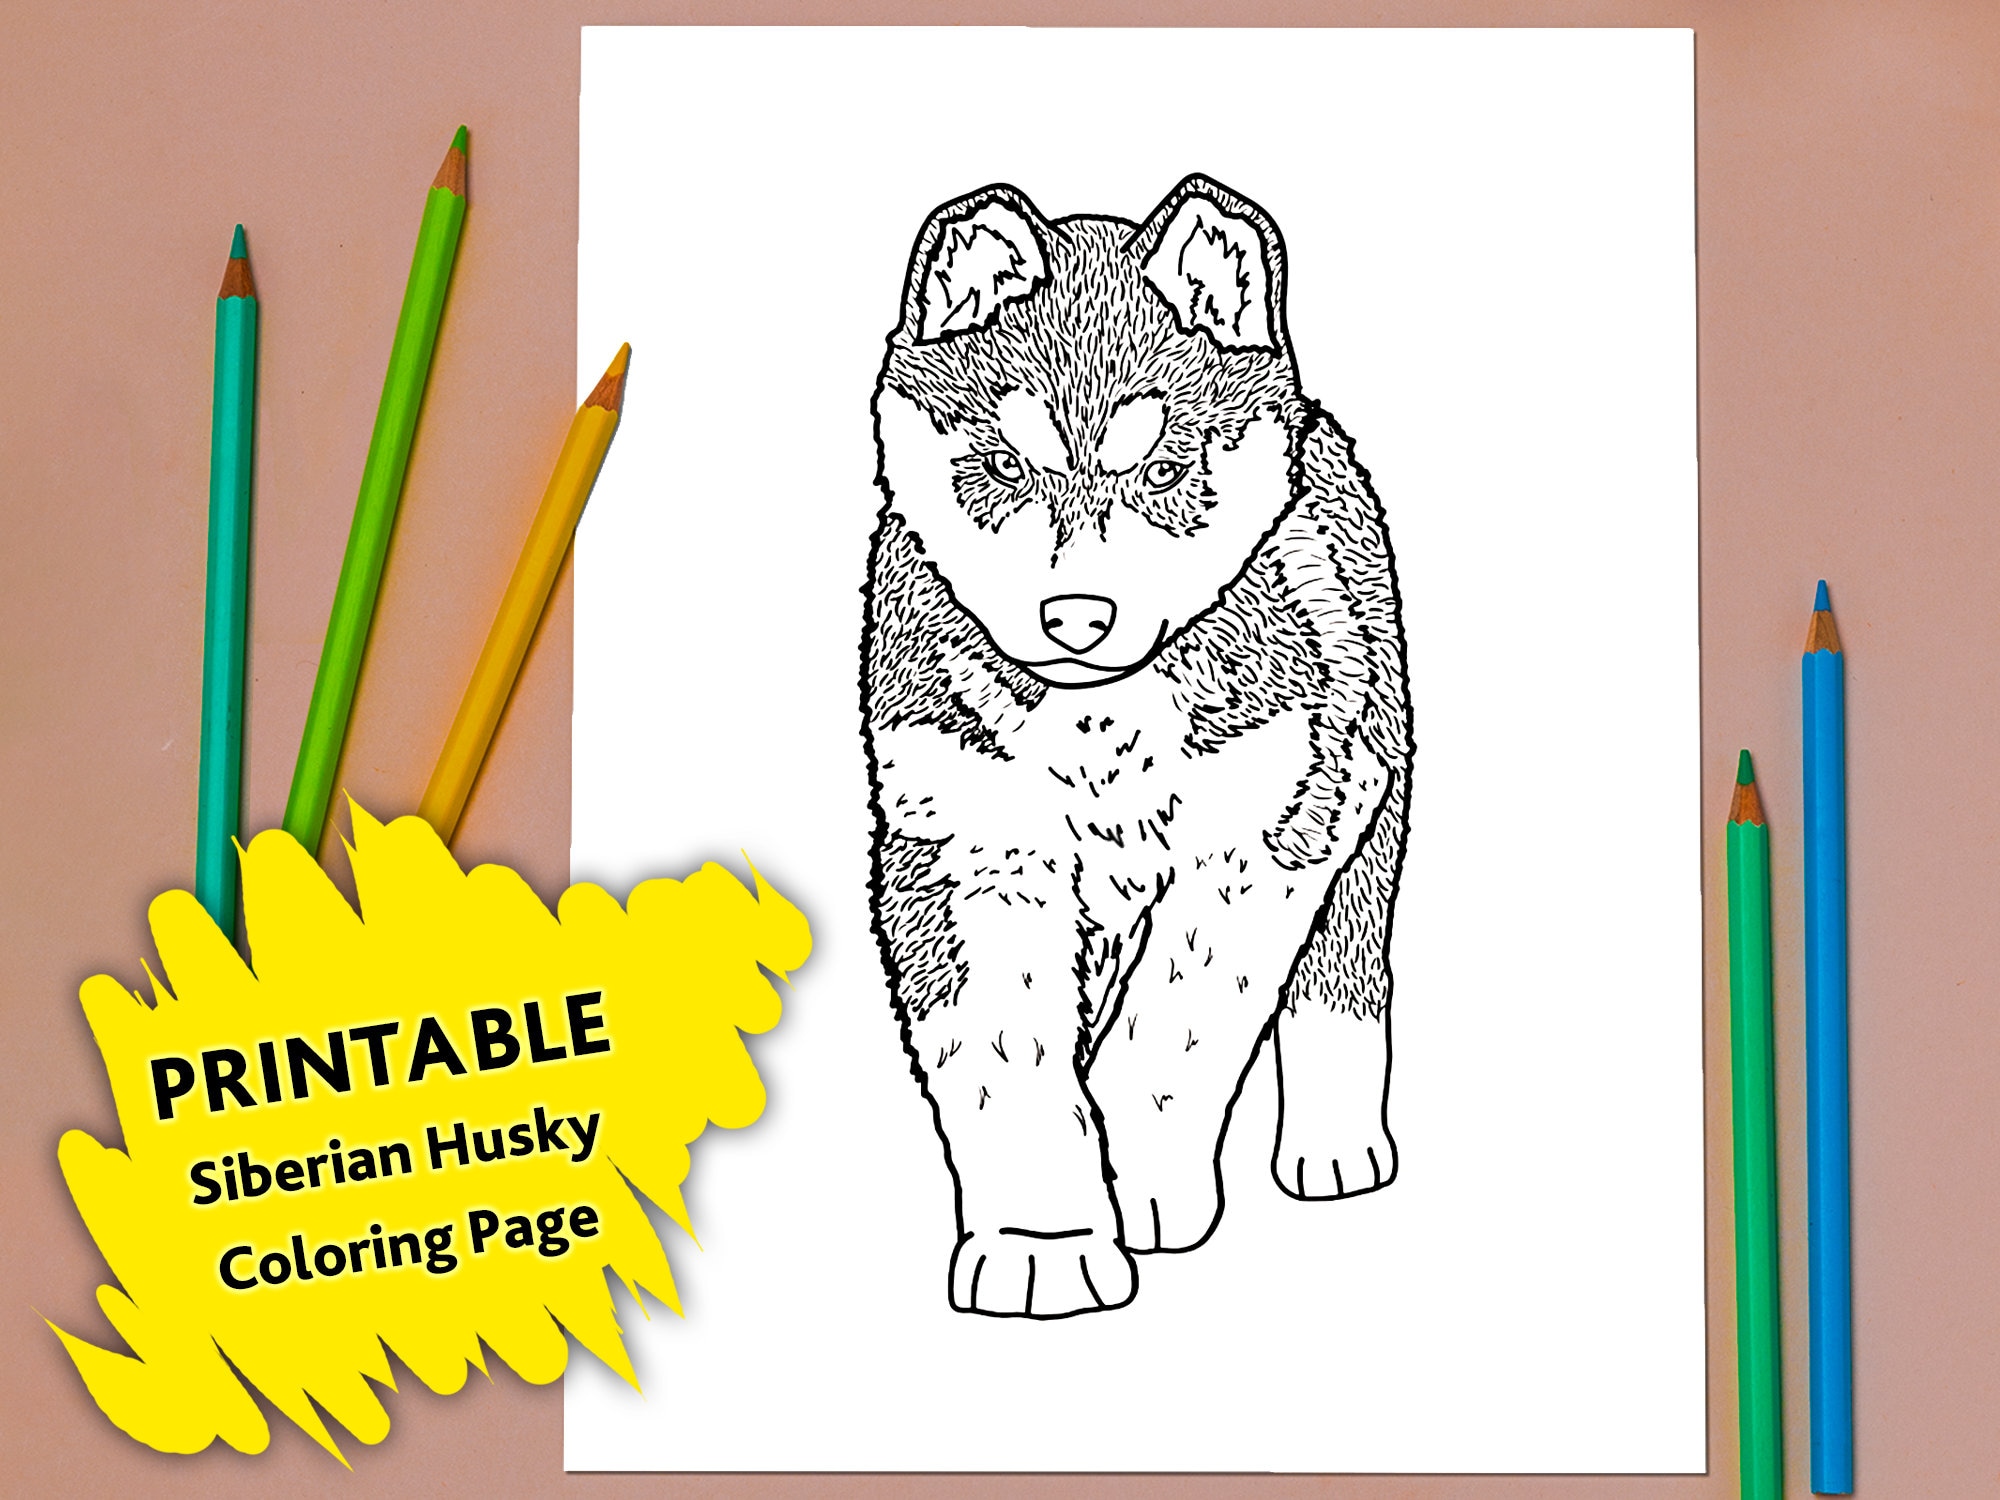 Siberian husky printable coloring page for children pdf download download now